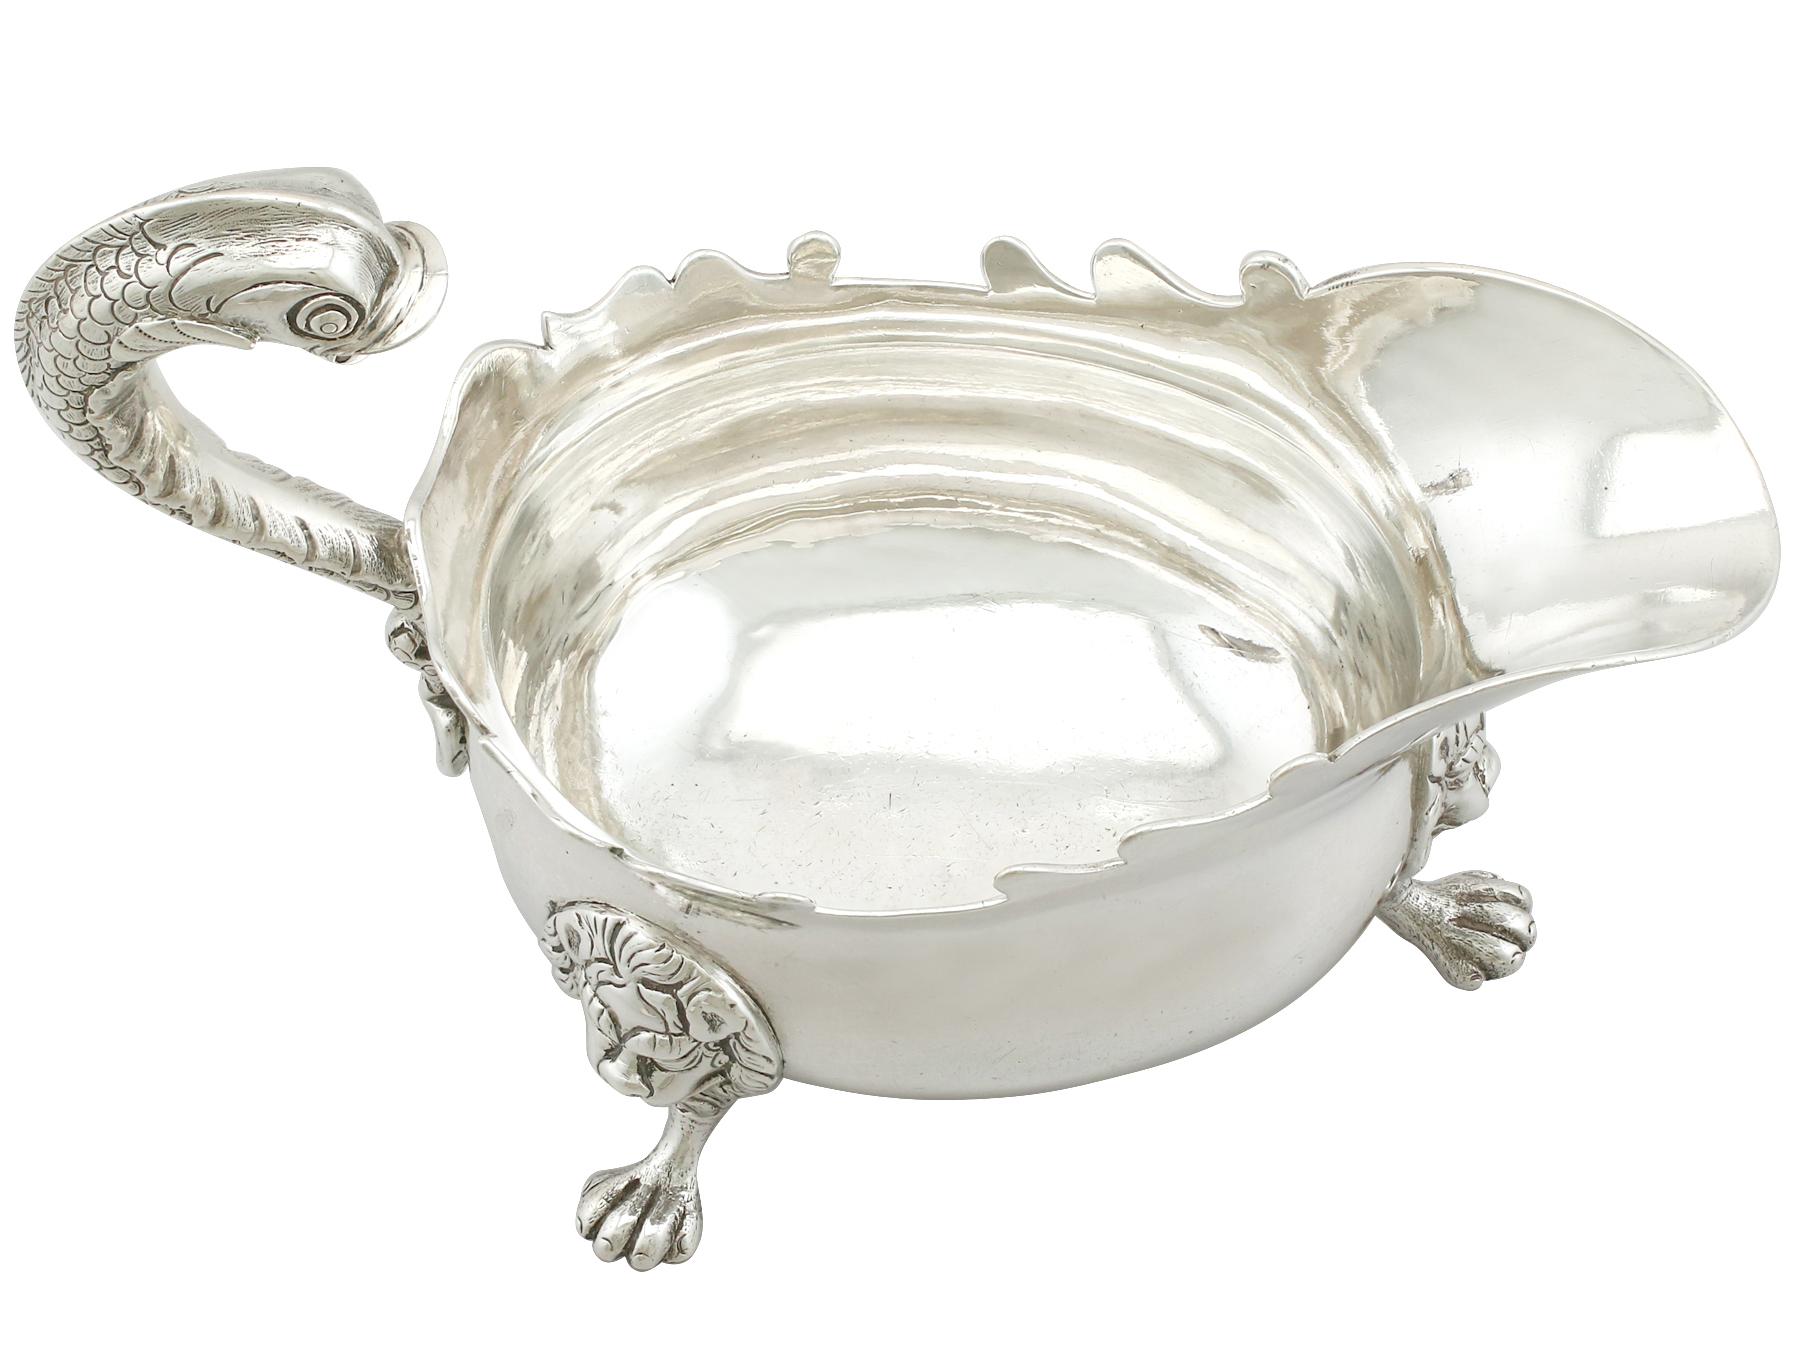 An exceptional, fine and impressive, antique Georgian Newcastle sterling silver sauce or gravy boat, part of our dining silverware collection.

This exceptional antique George II sterling silver sauceboat has a plain oval rounded form onto three